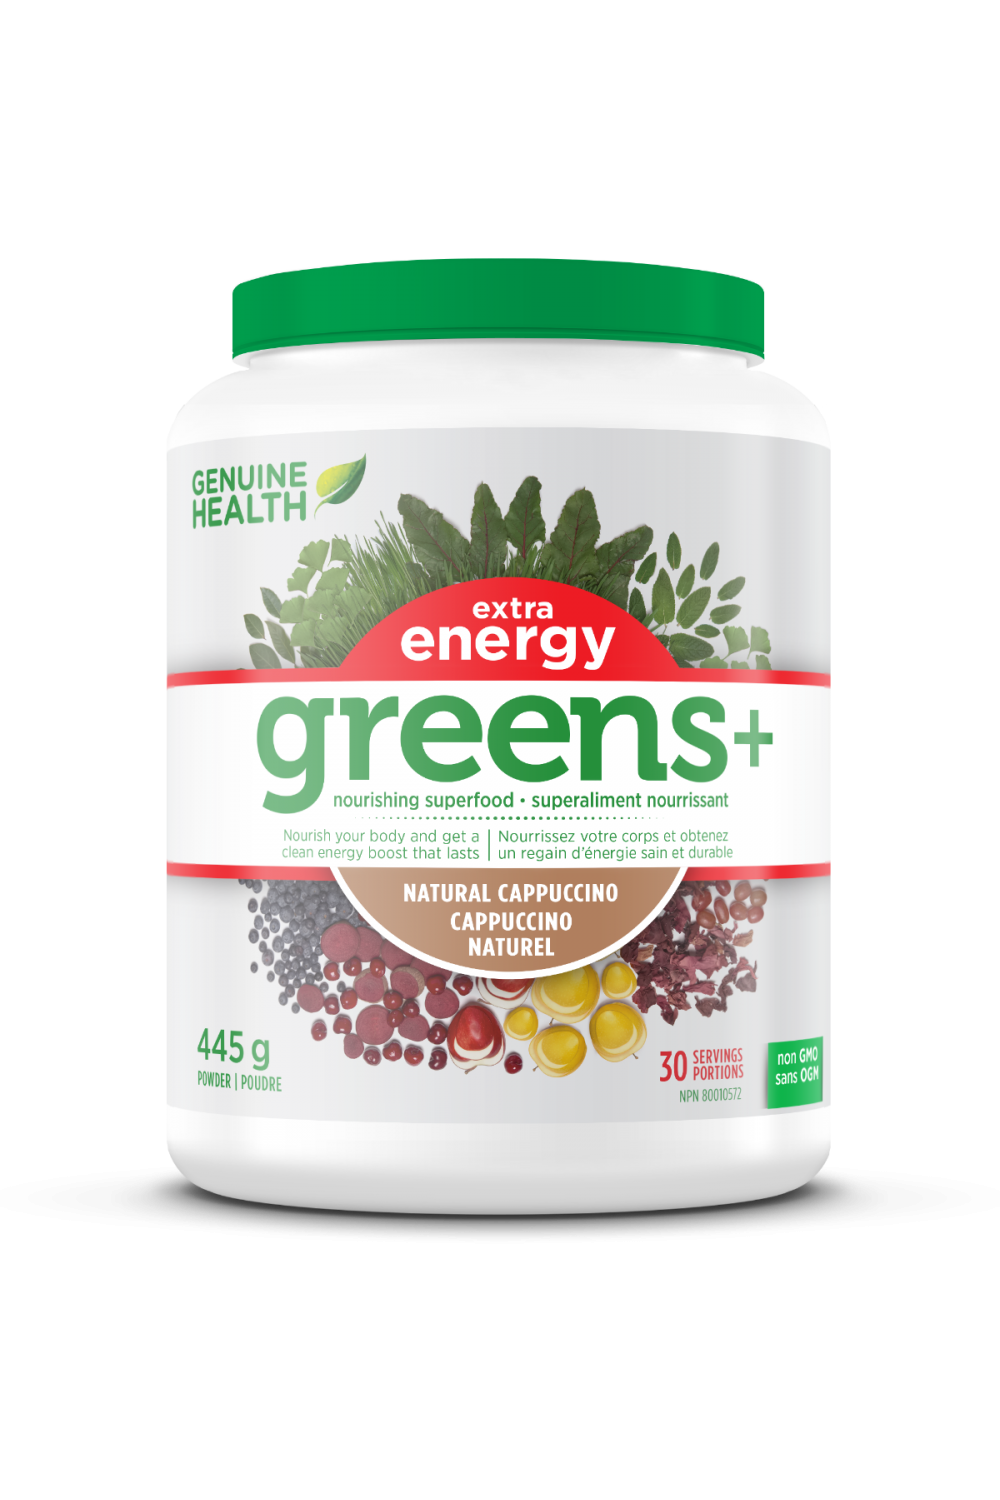 Genuine Health Greens+ Extra Energy - Natural Cappuccino Flavour 445g